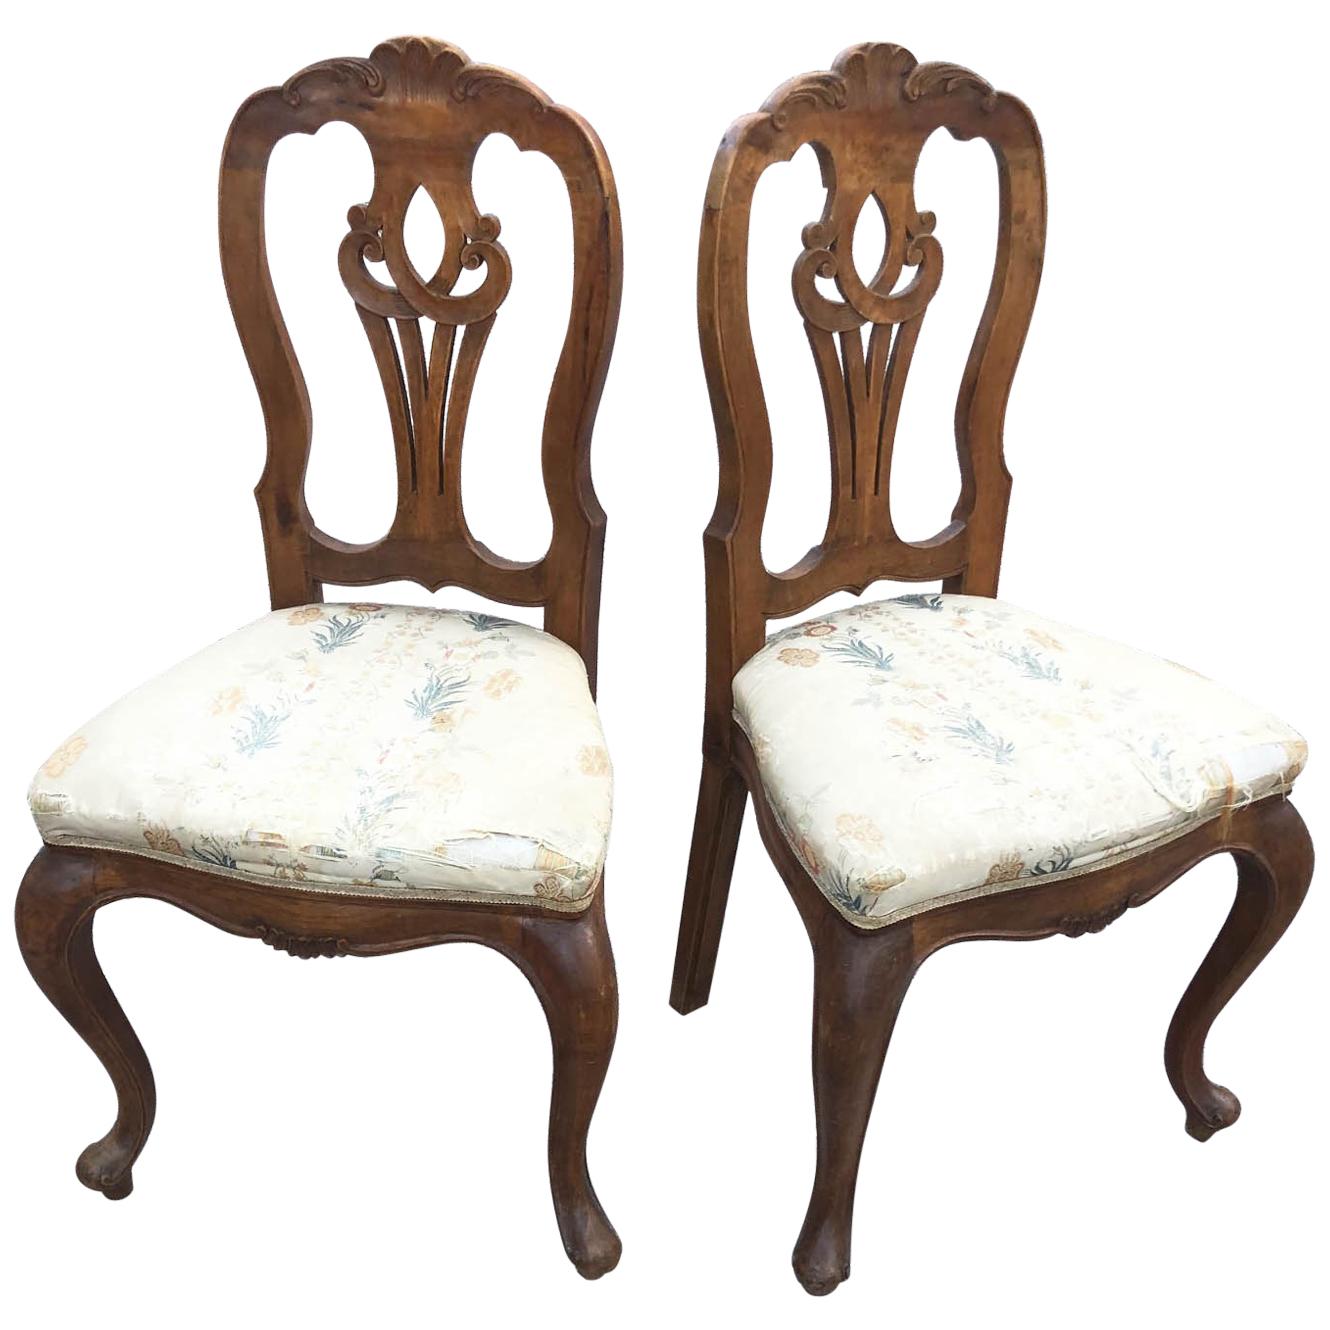  Pair of Armchairs in Solid Walnut, with Upholstery to Be Redone Elegant